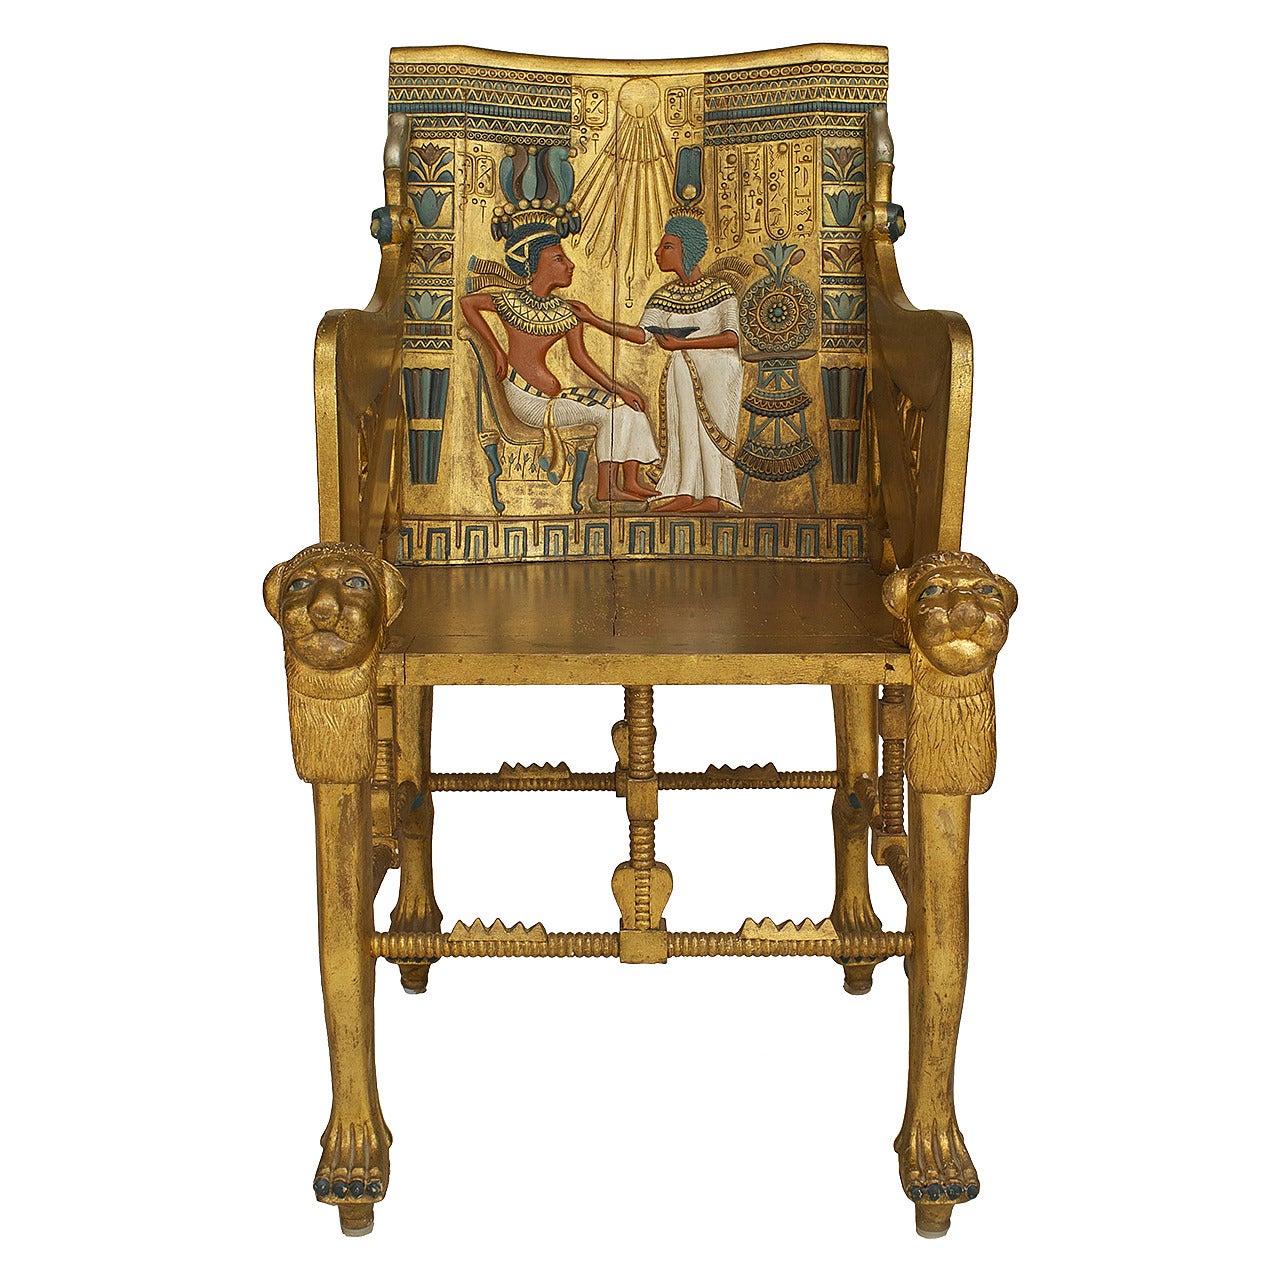 Late 19th c. Egyptian Revival Polychrome Carved Throne Chair